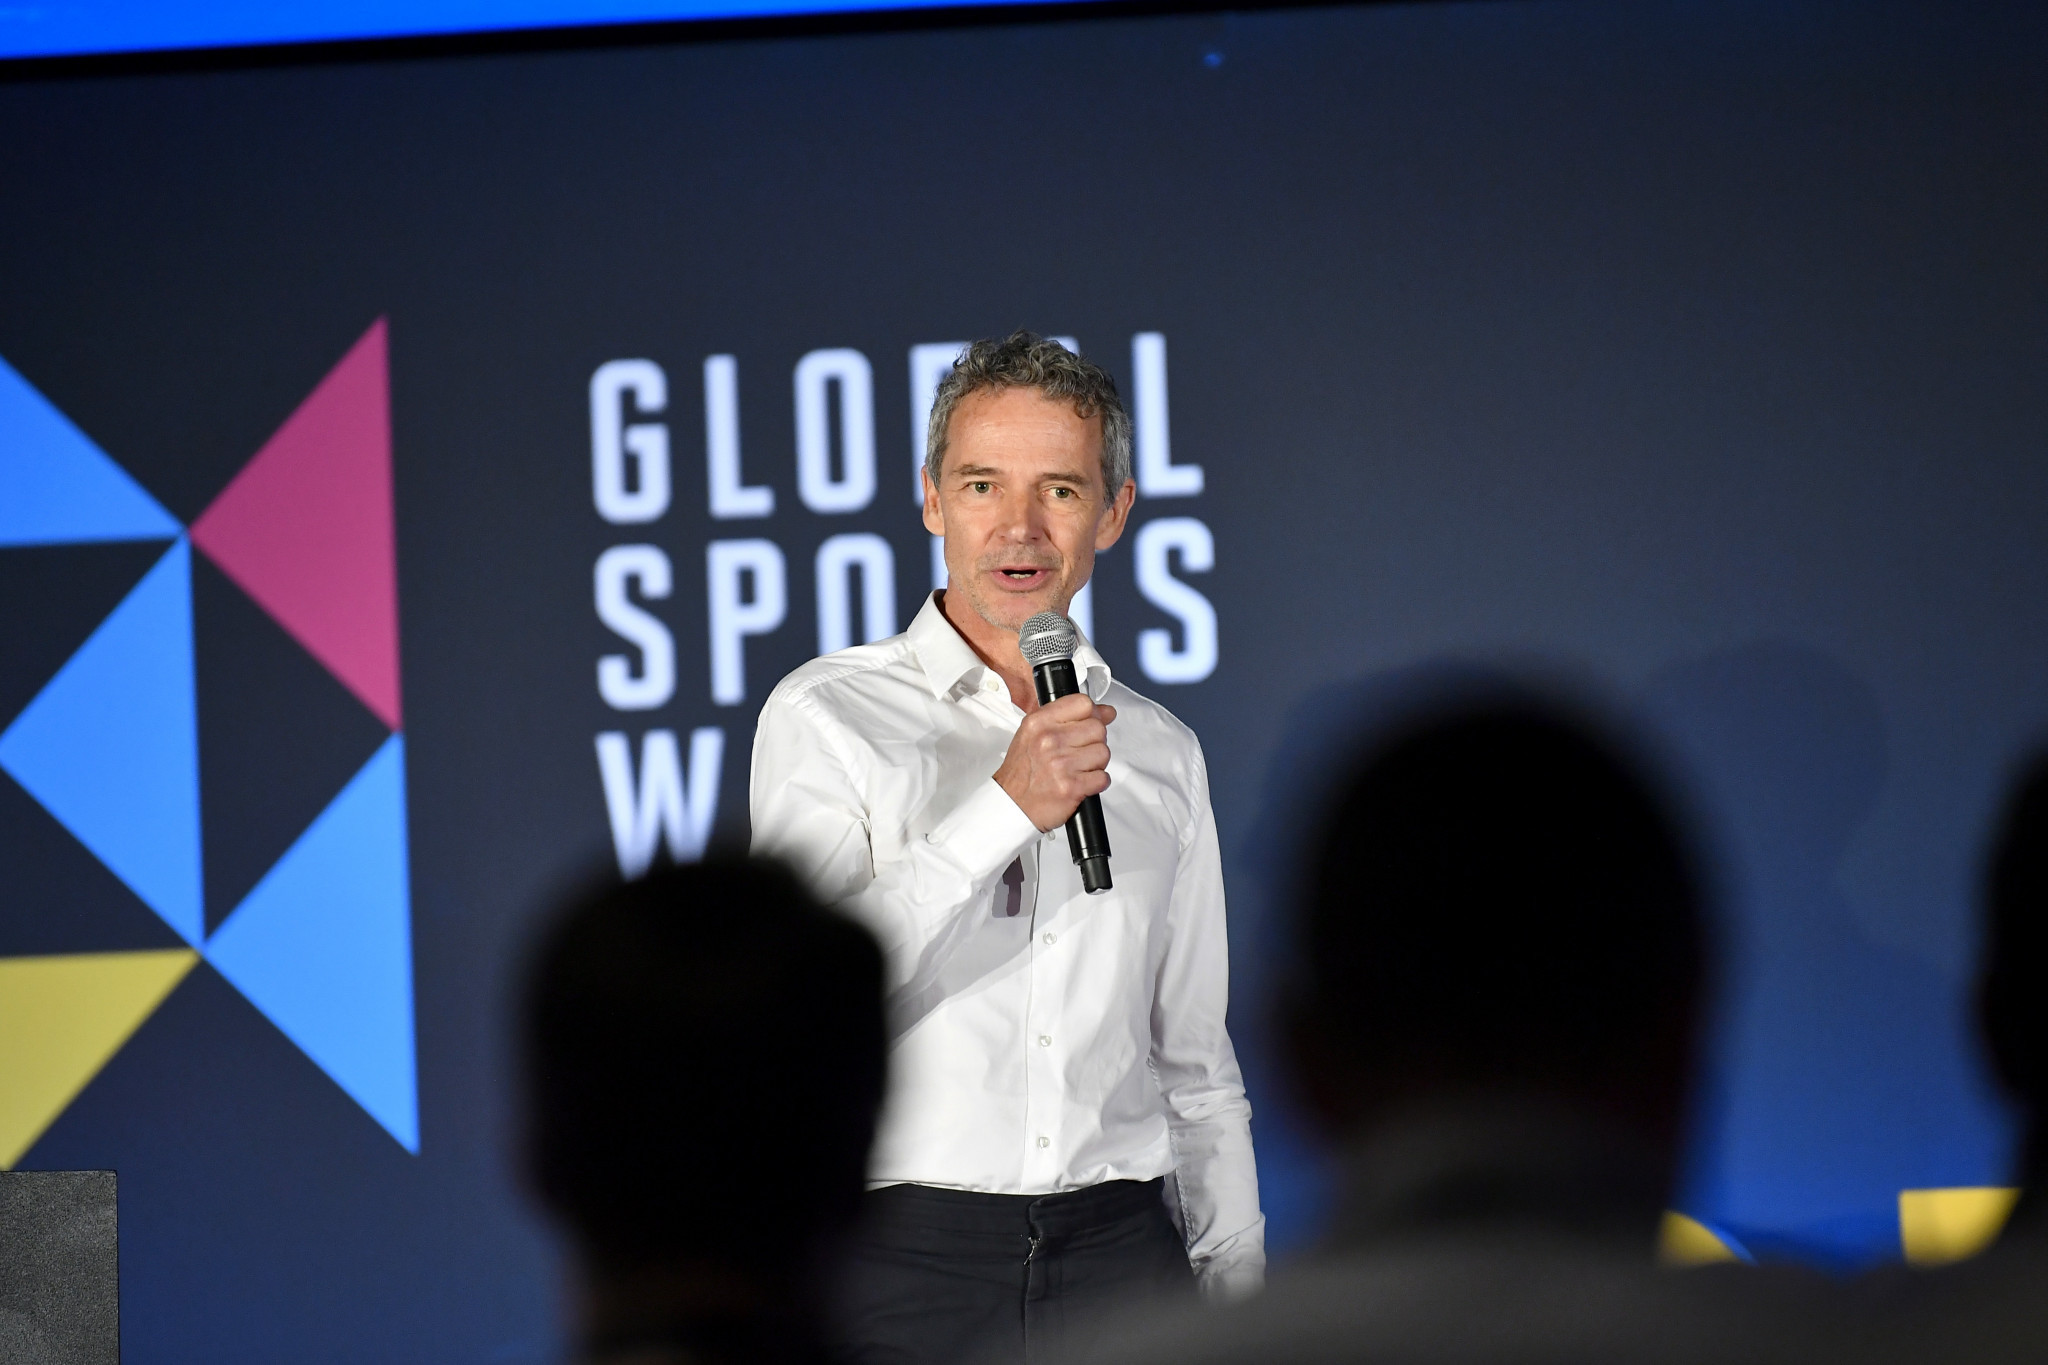 Boyer addressed the audience as the 2022 Global Sports Week came to an end ©Getty Images